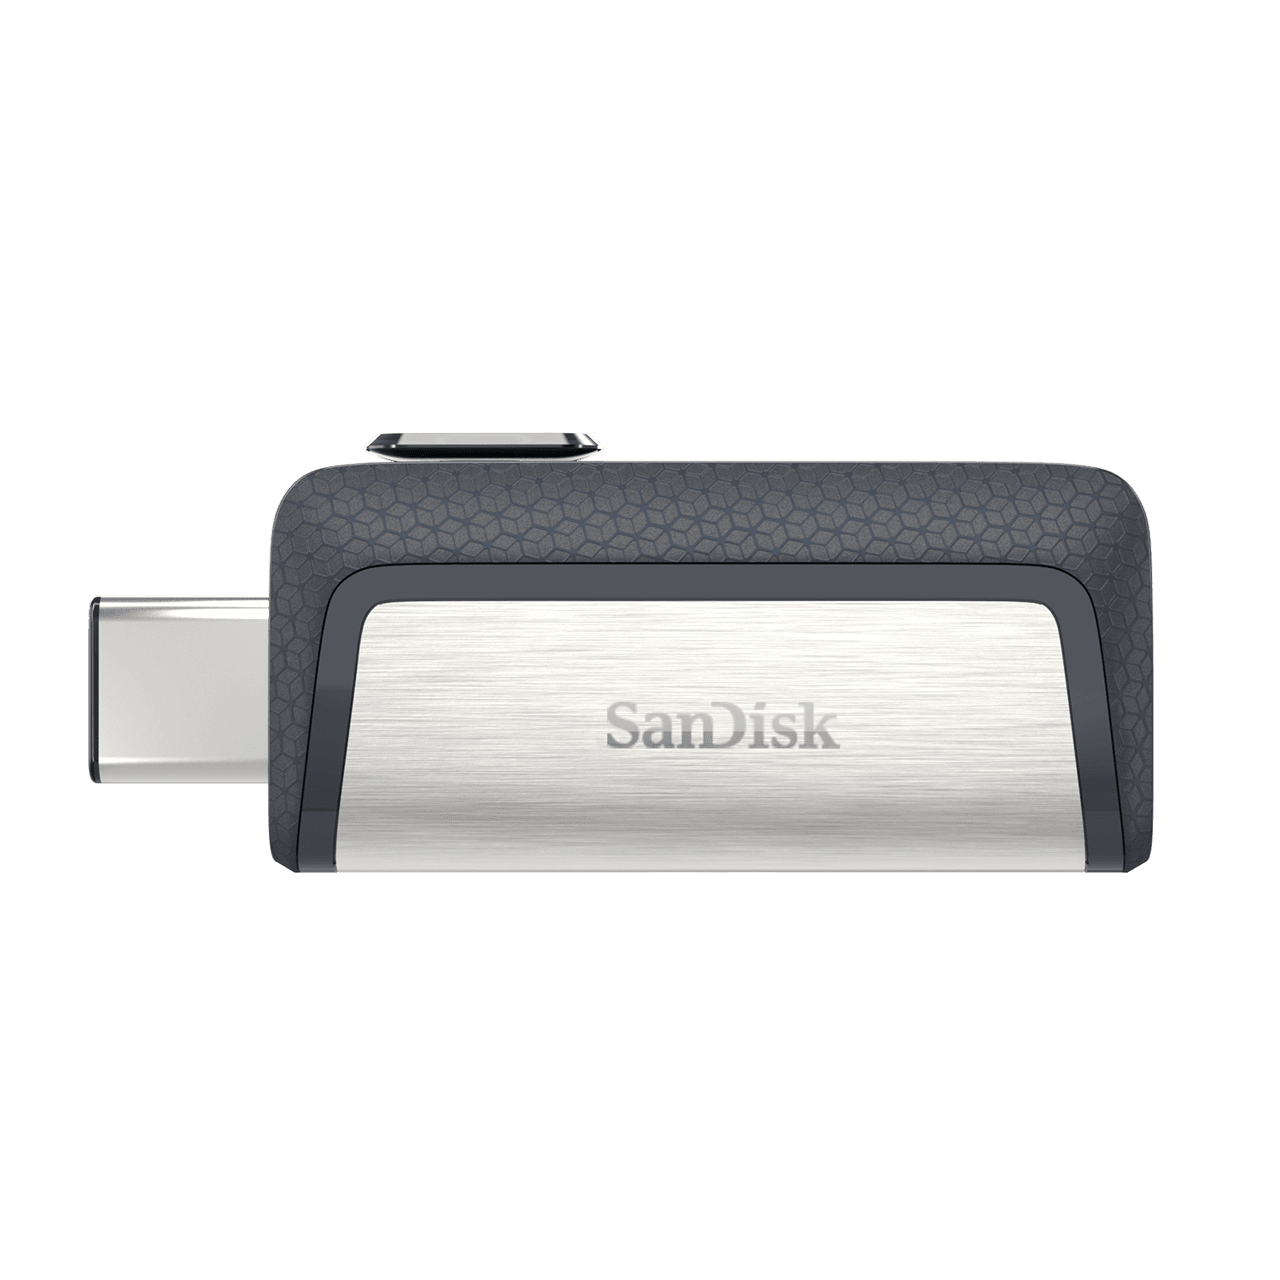 SanDisk Ultra Dual Drive OTG USB 3.1 Type-C ( SDDDC2 Series )with High Speed Transfer, Compact Size, Slide Design, SanDisk Memory Zone APP Support, Strap Hole (16GB / 32GB / 64GB / 128GB / 256GB)